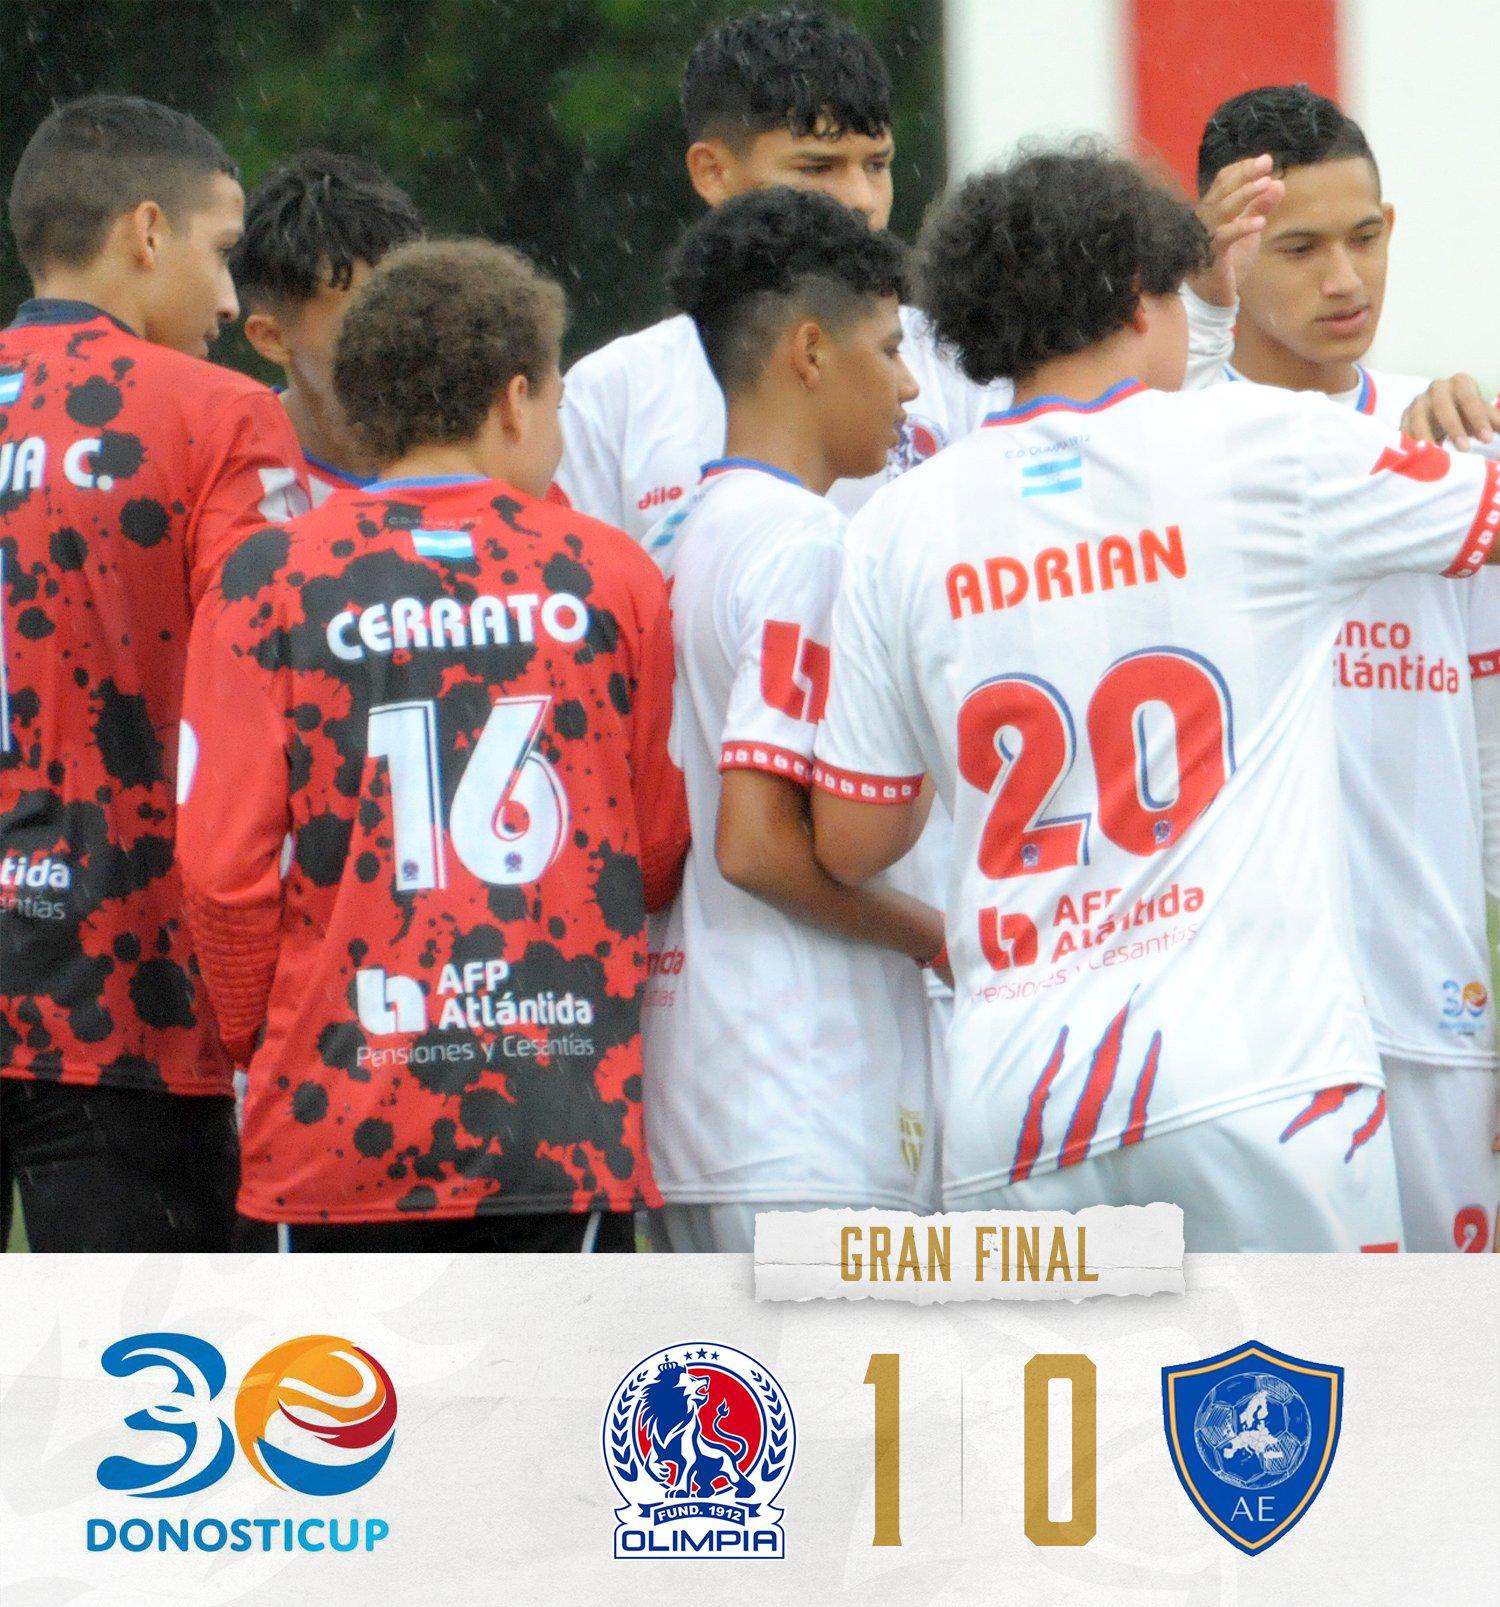 The result of the final match between Olimpia and Atlético Europa